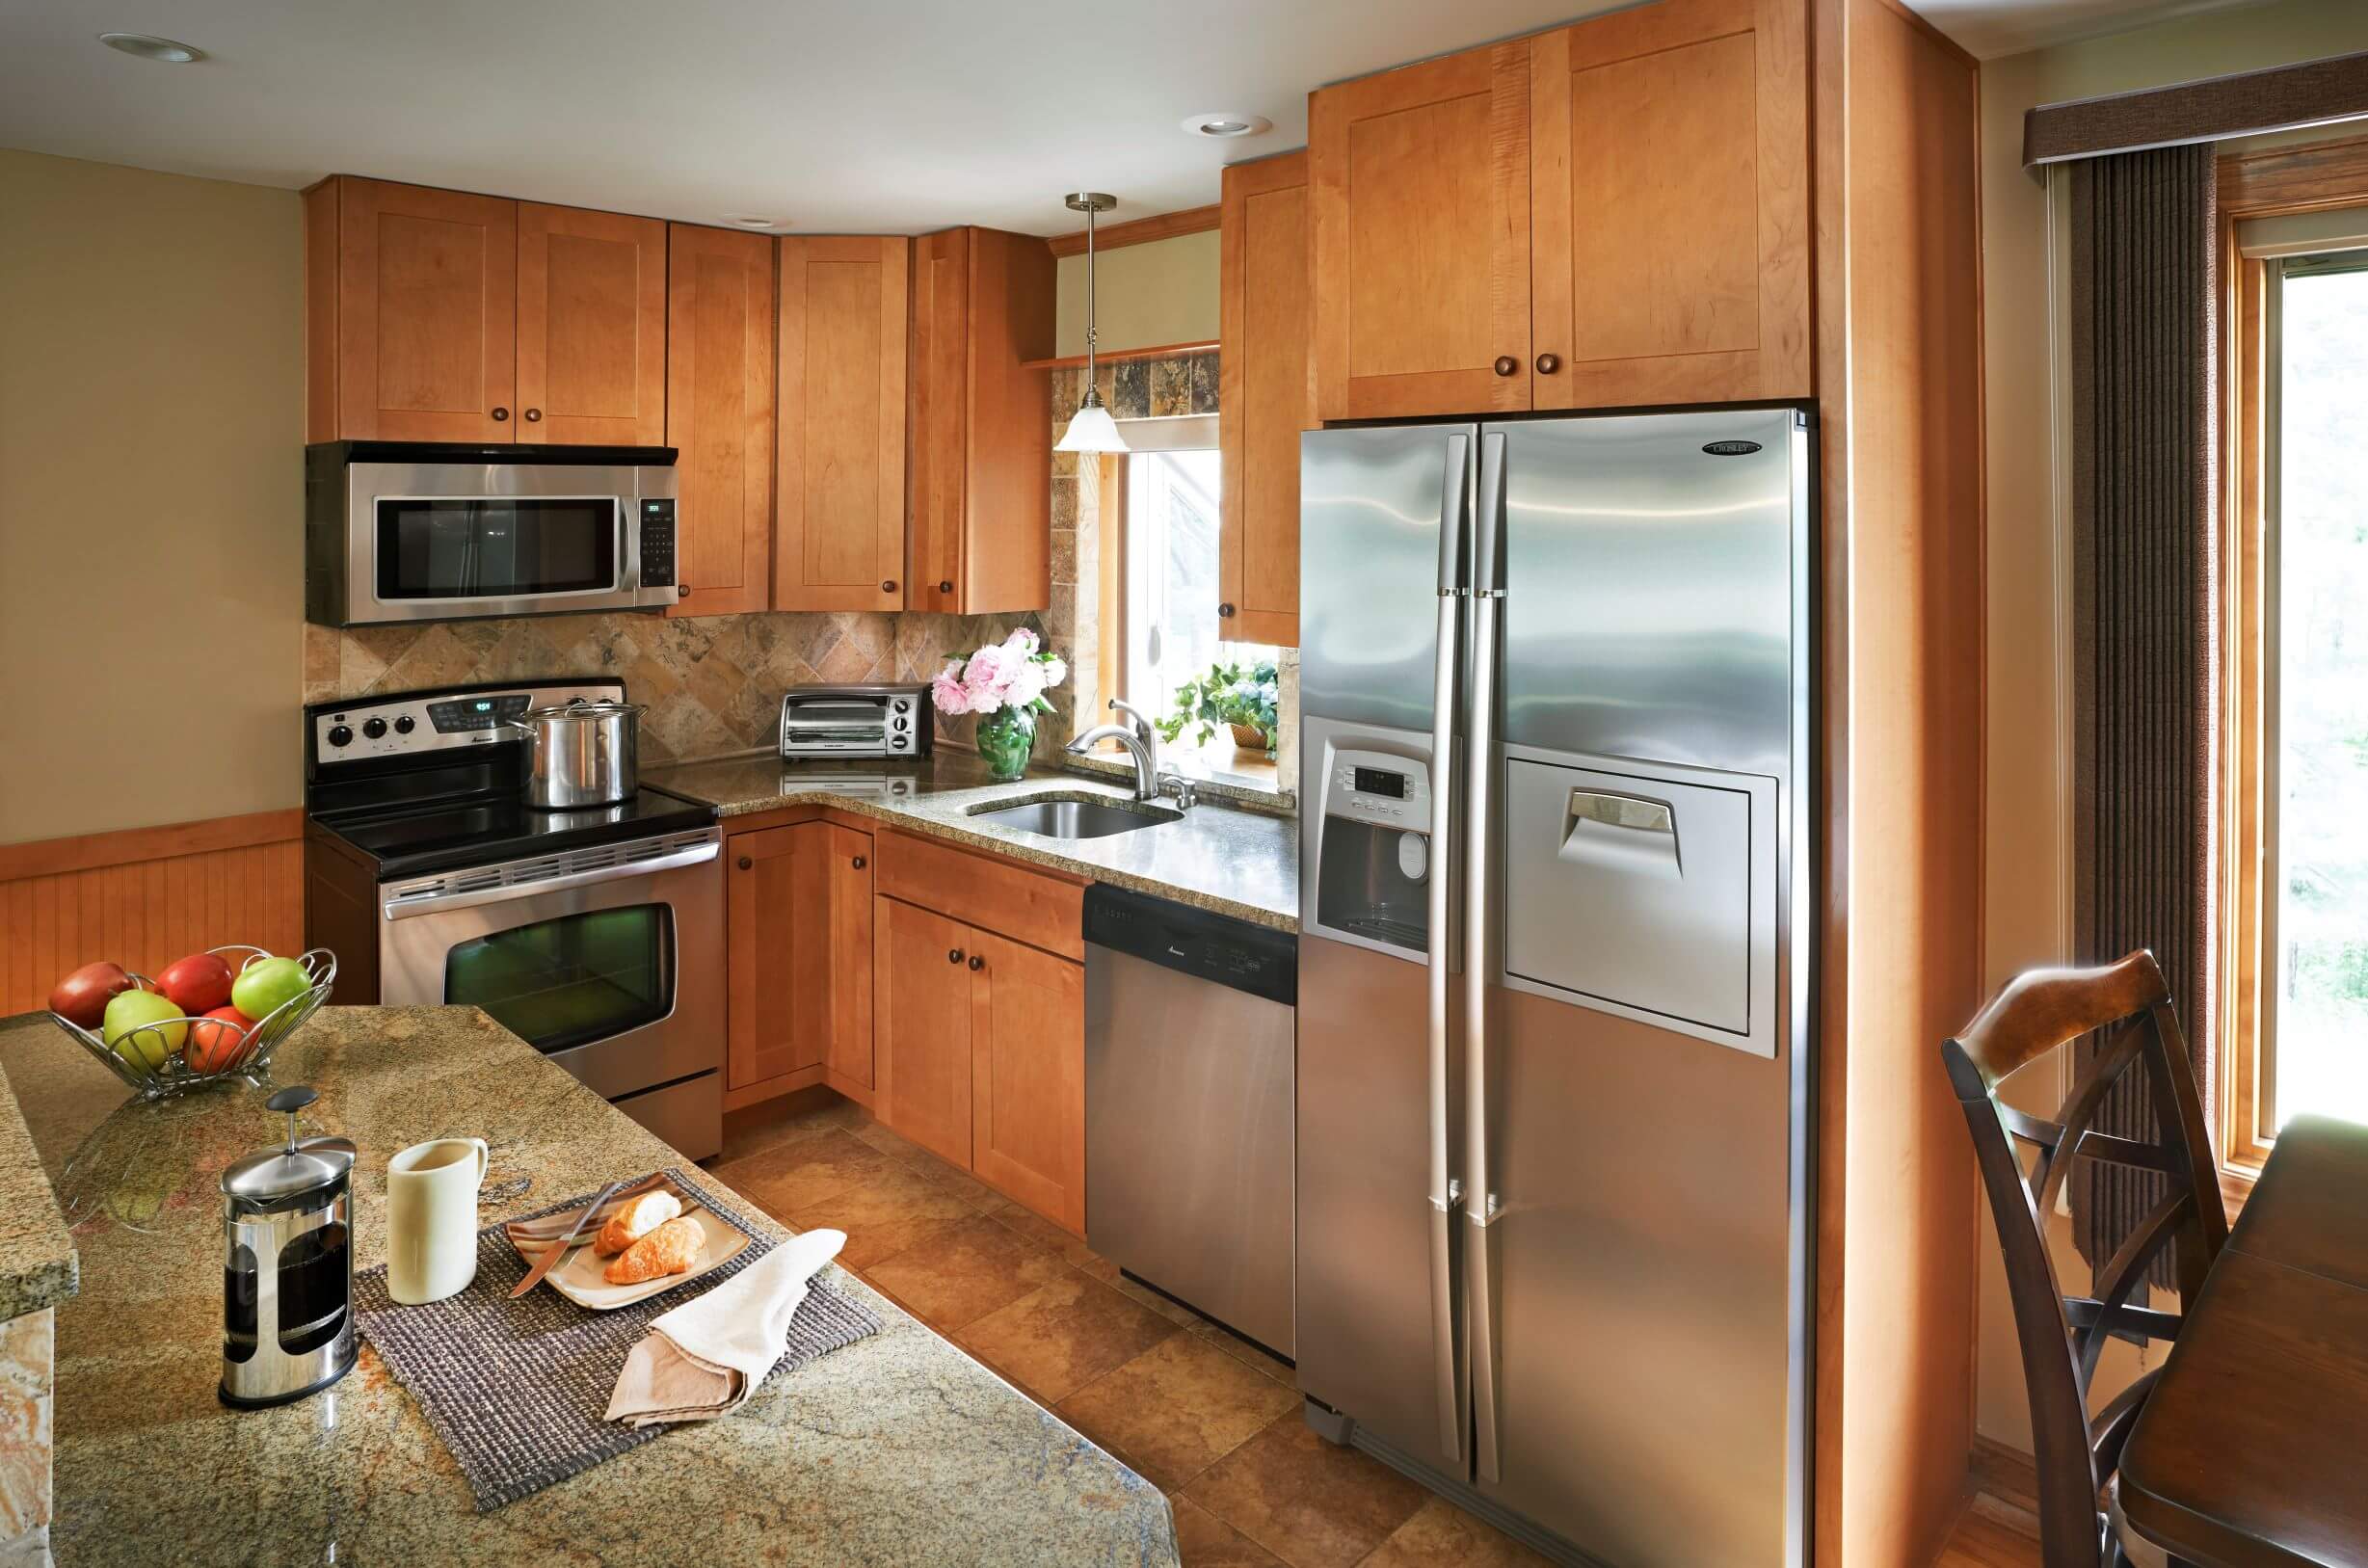 Renovating a kitchen will save you time and money with Quick Ship Kitchens